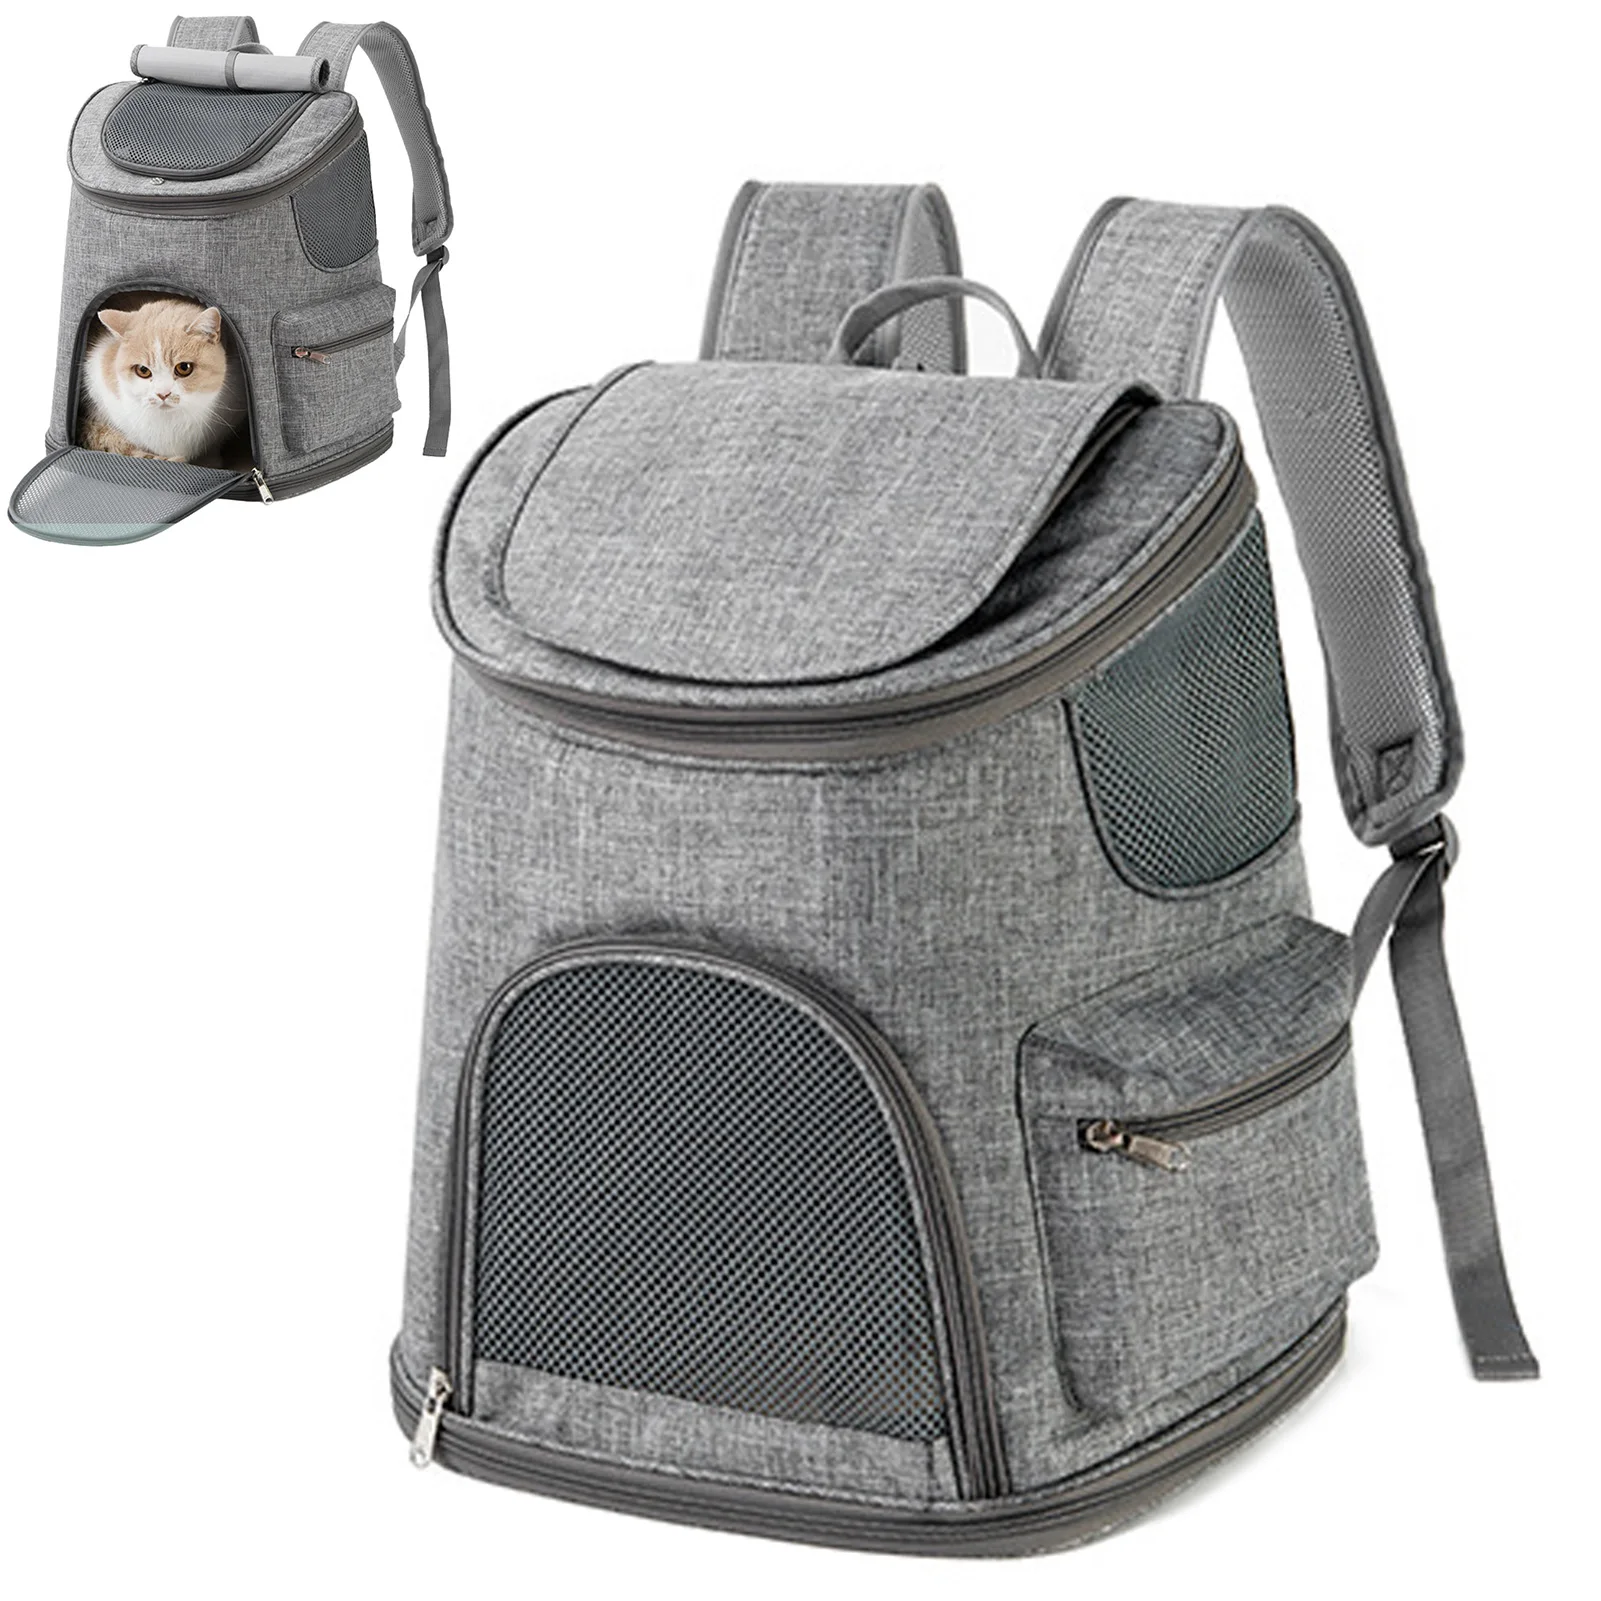 

Dog Backpack Bag Collapsible Portable Travel Bag For Safety With Internal Safety Belt Foldable Walker Pet Box Large Small Cats